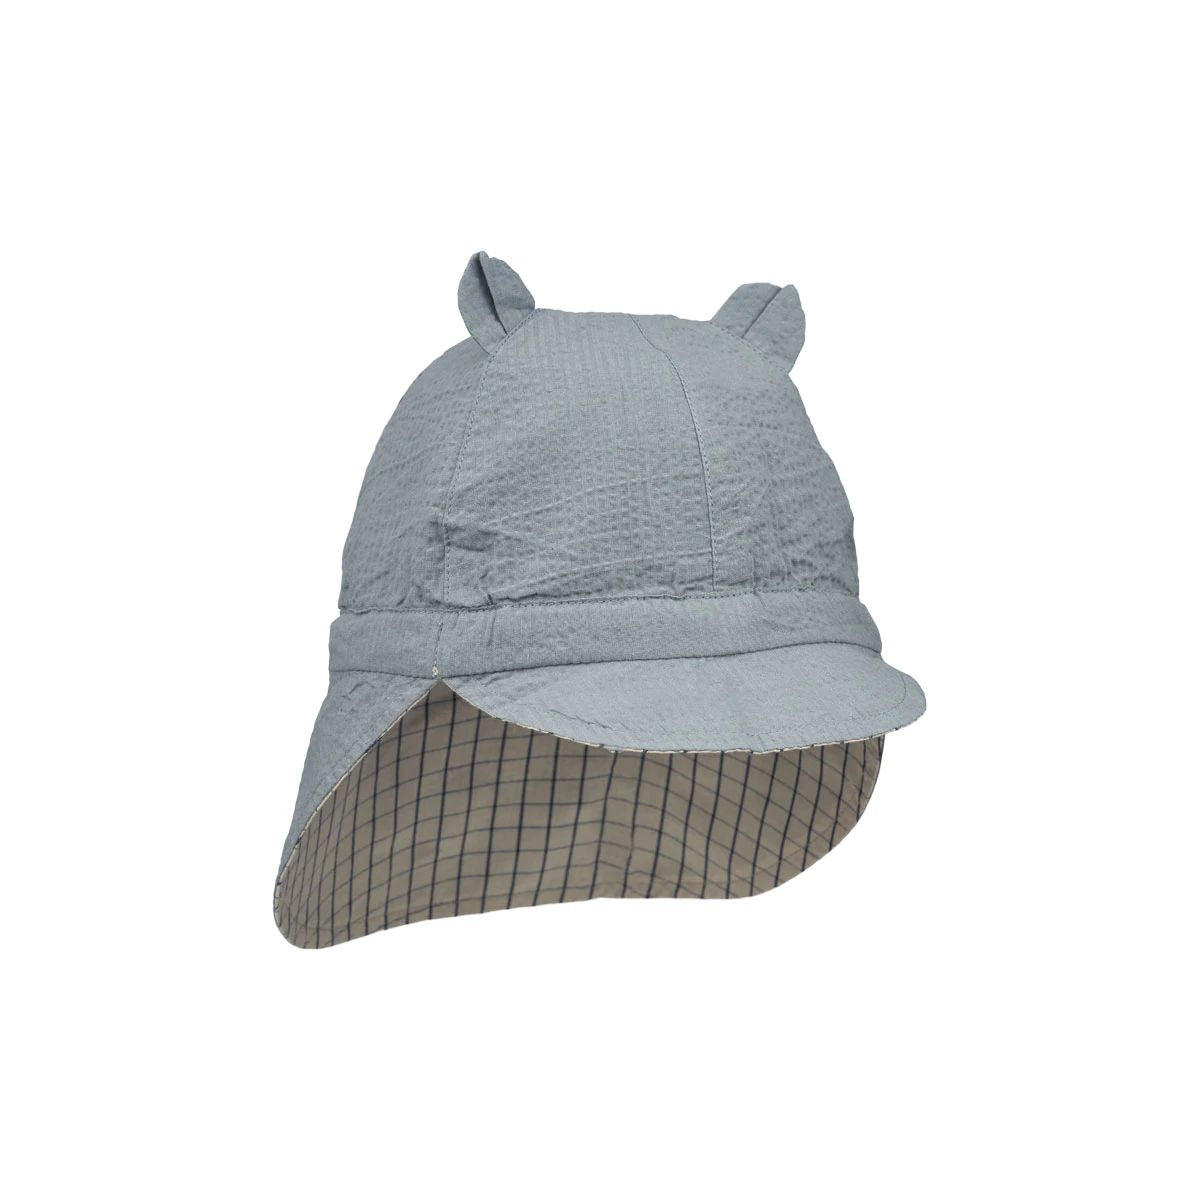 Boys & Girls Navy Check Double Sided Sunhat